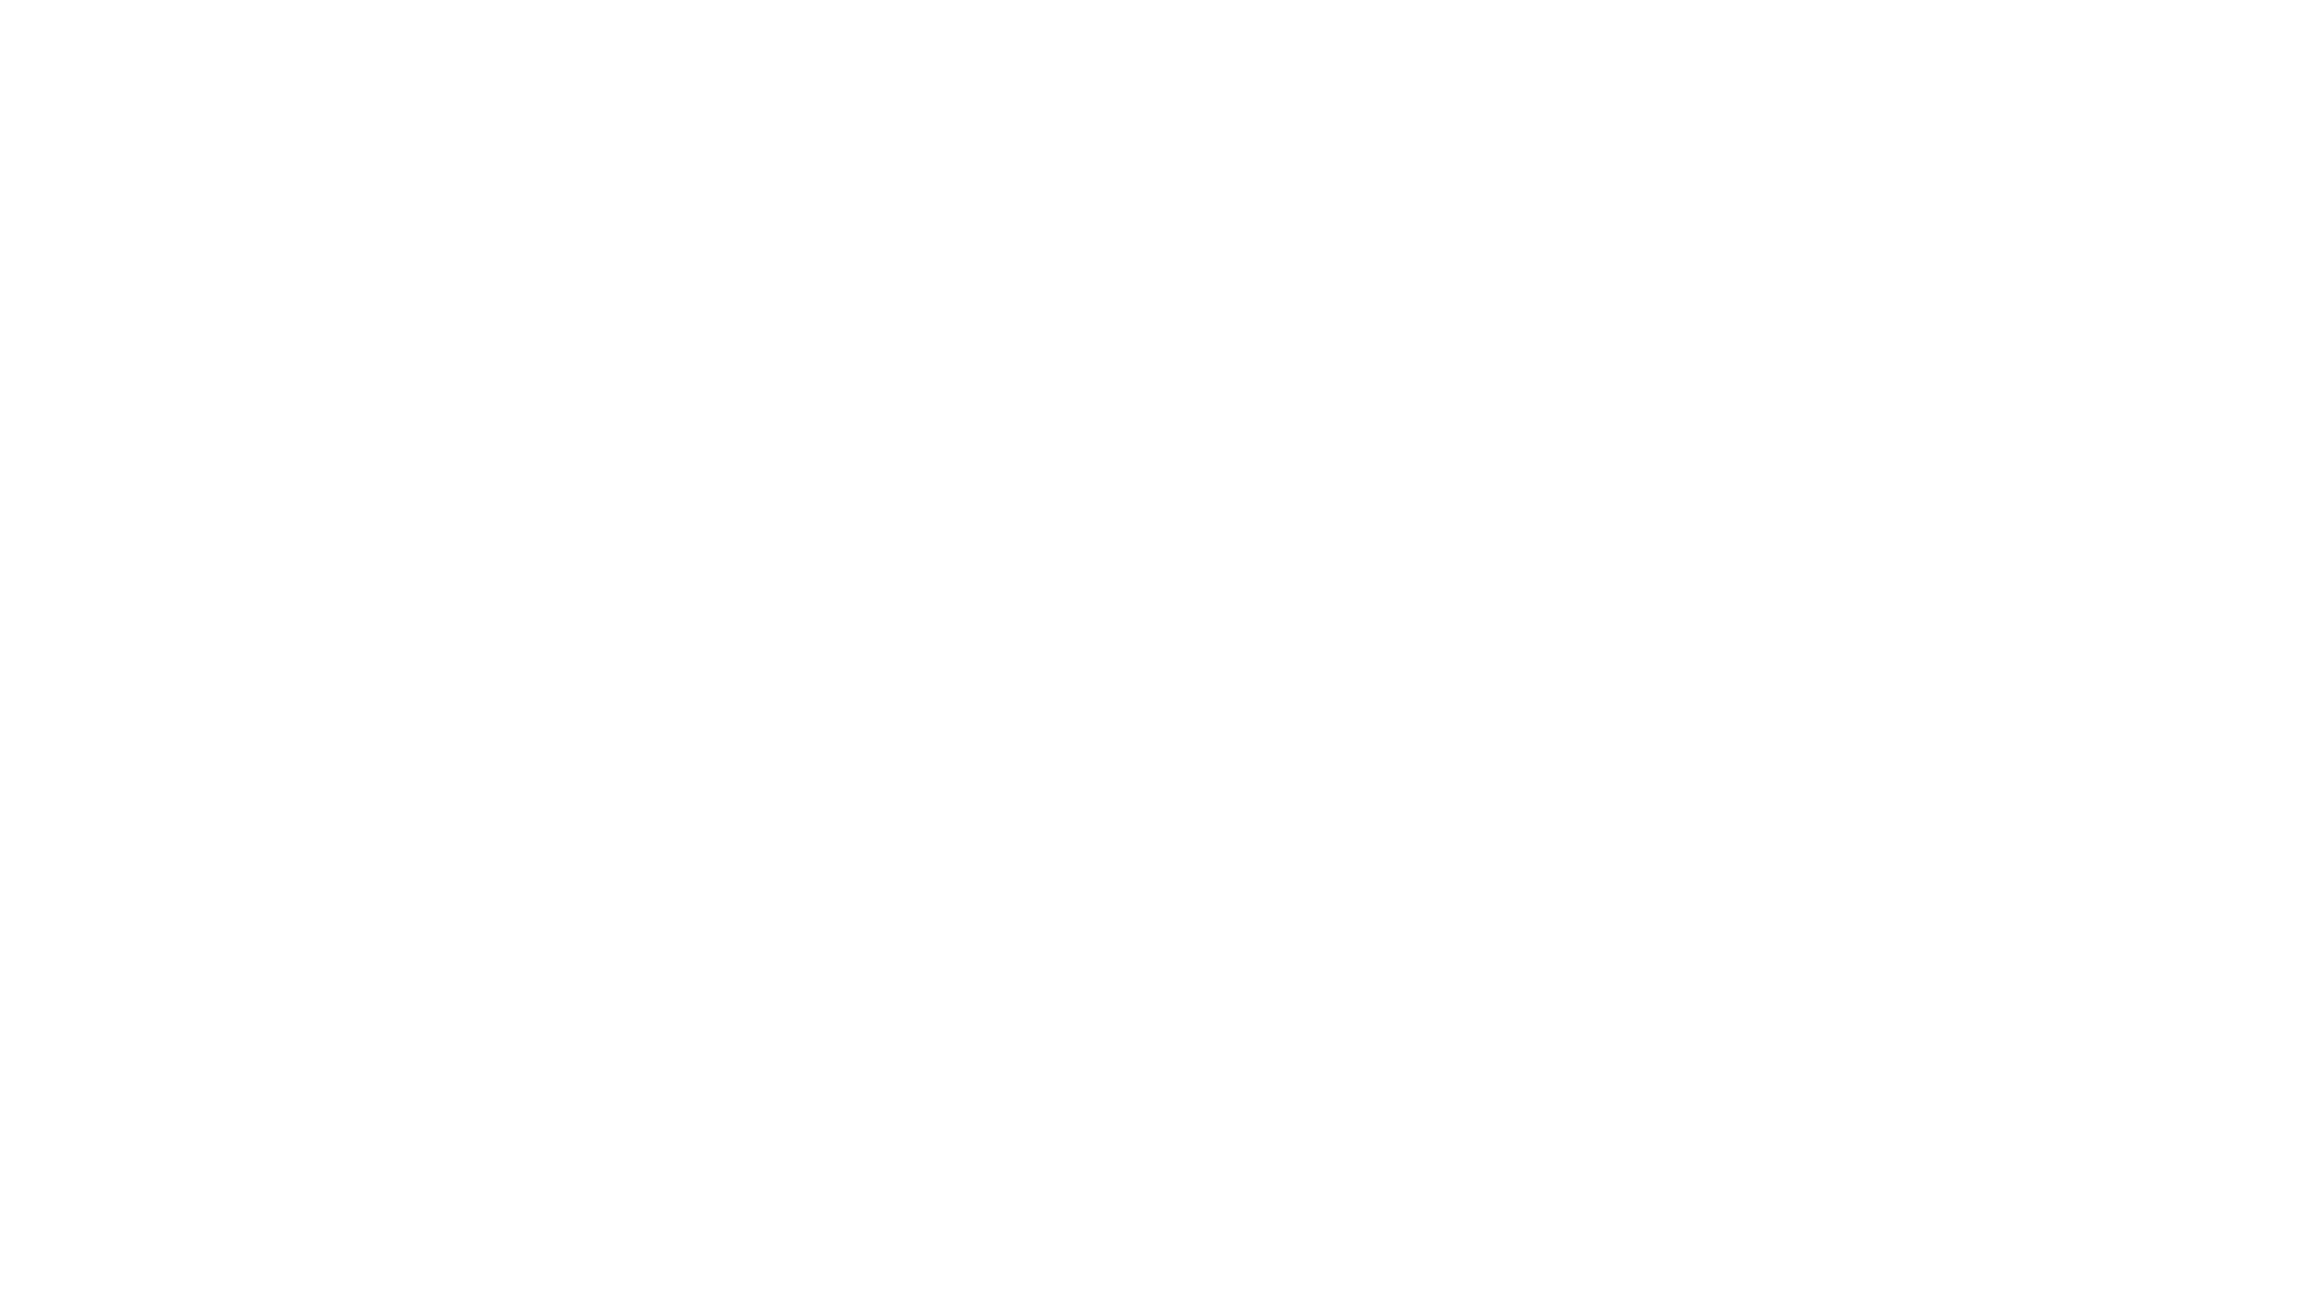 Tom and Jerry: The Fast and the Furry logo